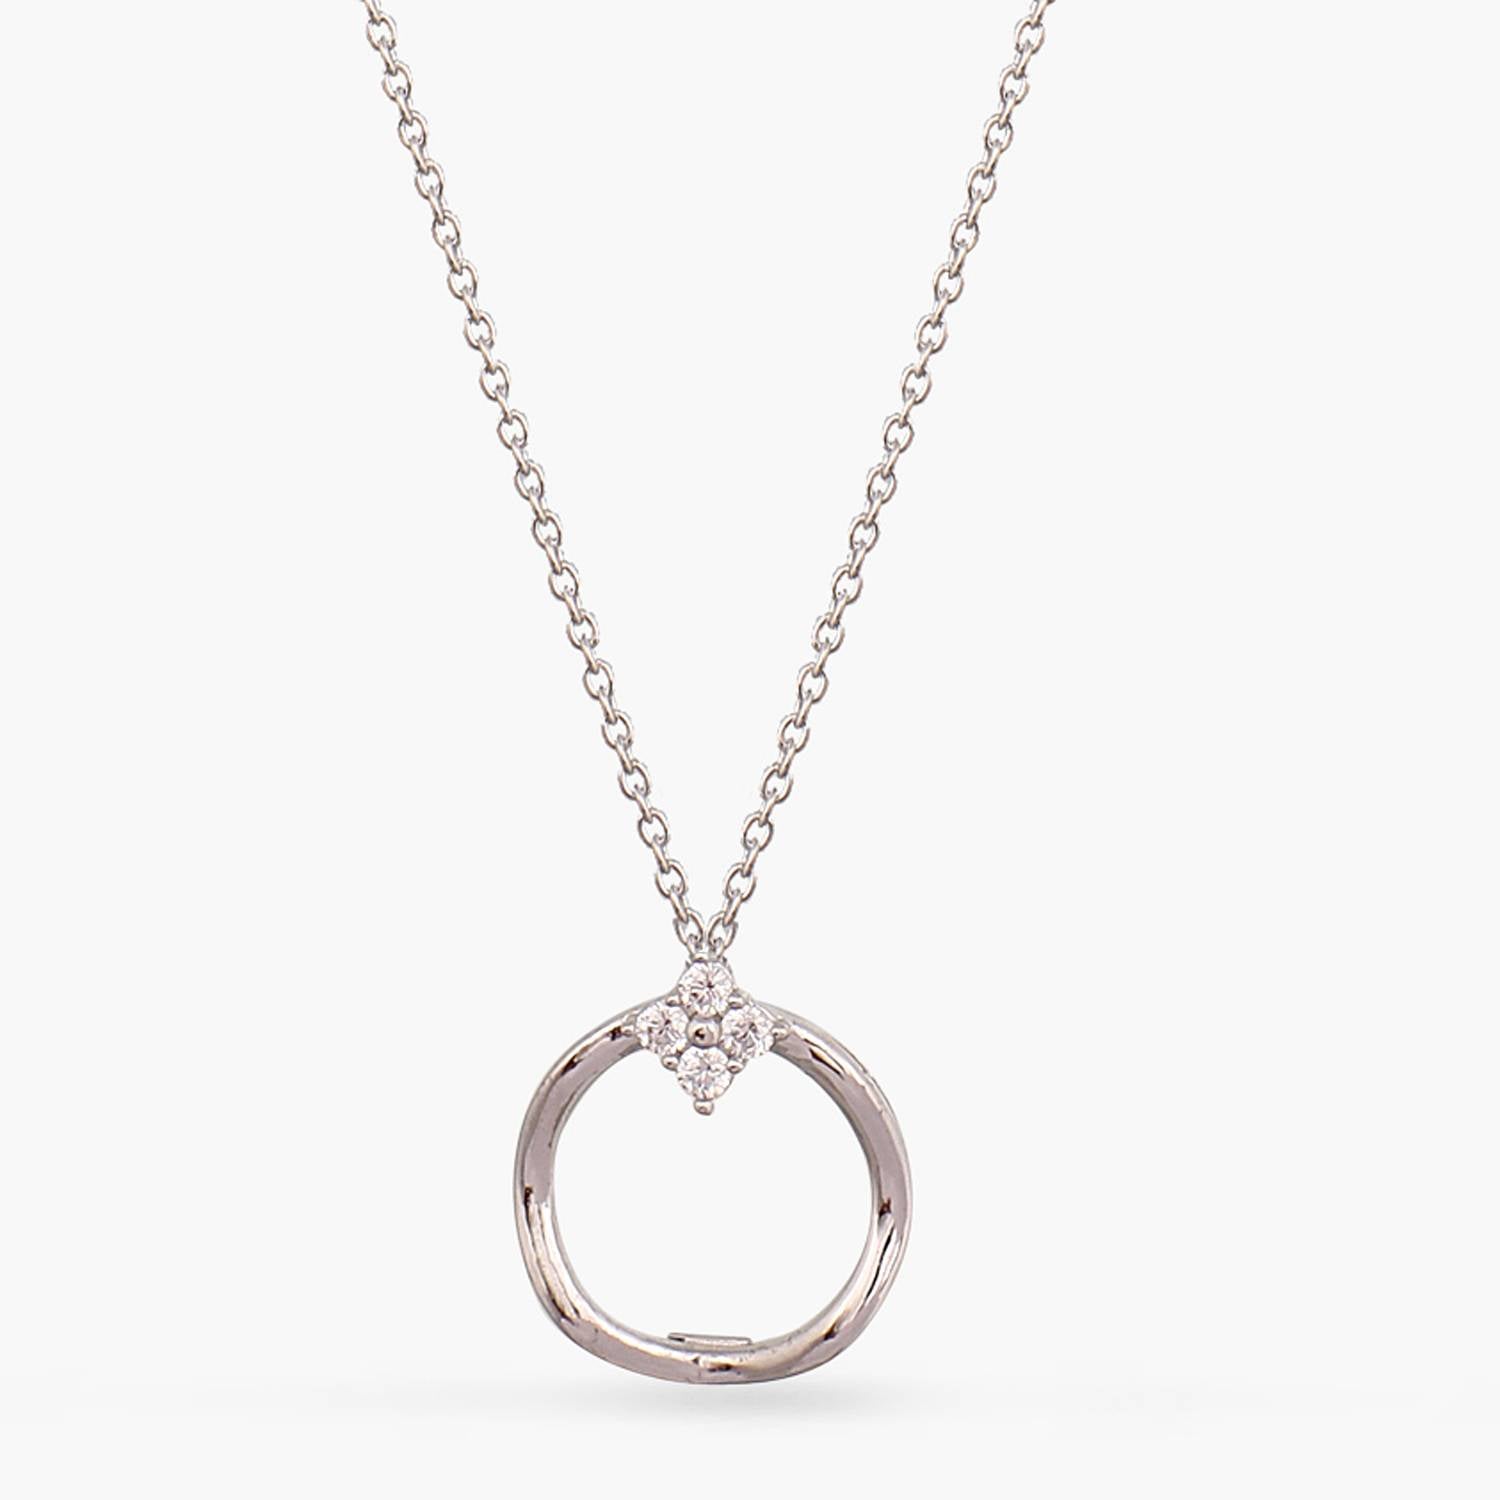 Stamped Sterling Silver Crystal Rings Necklace | Lisa Angel